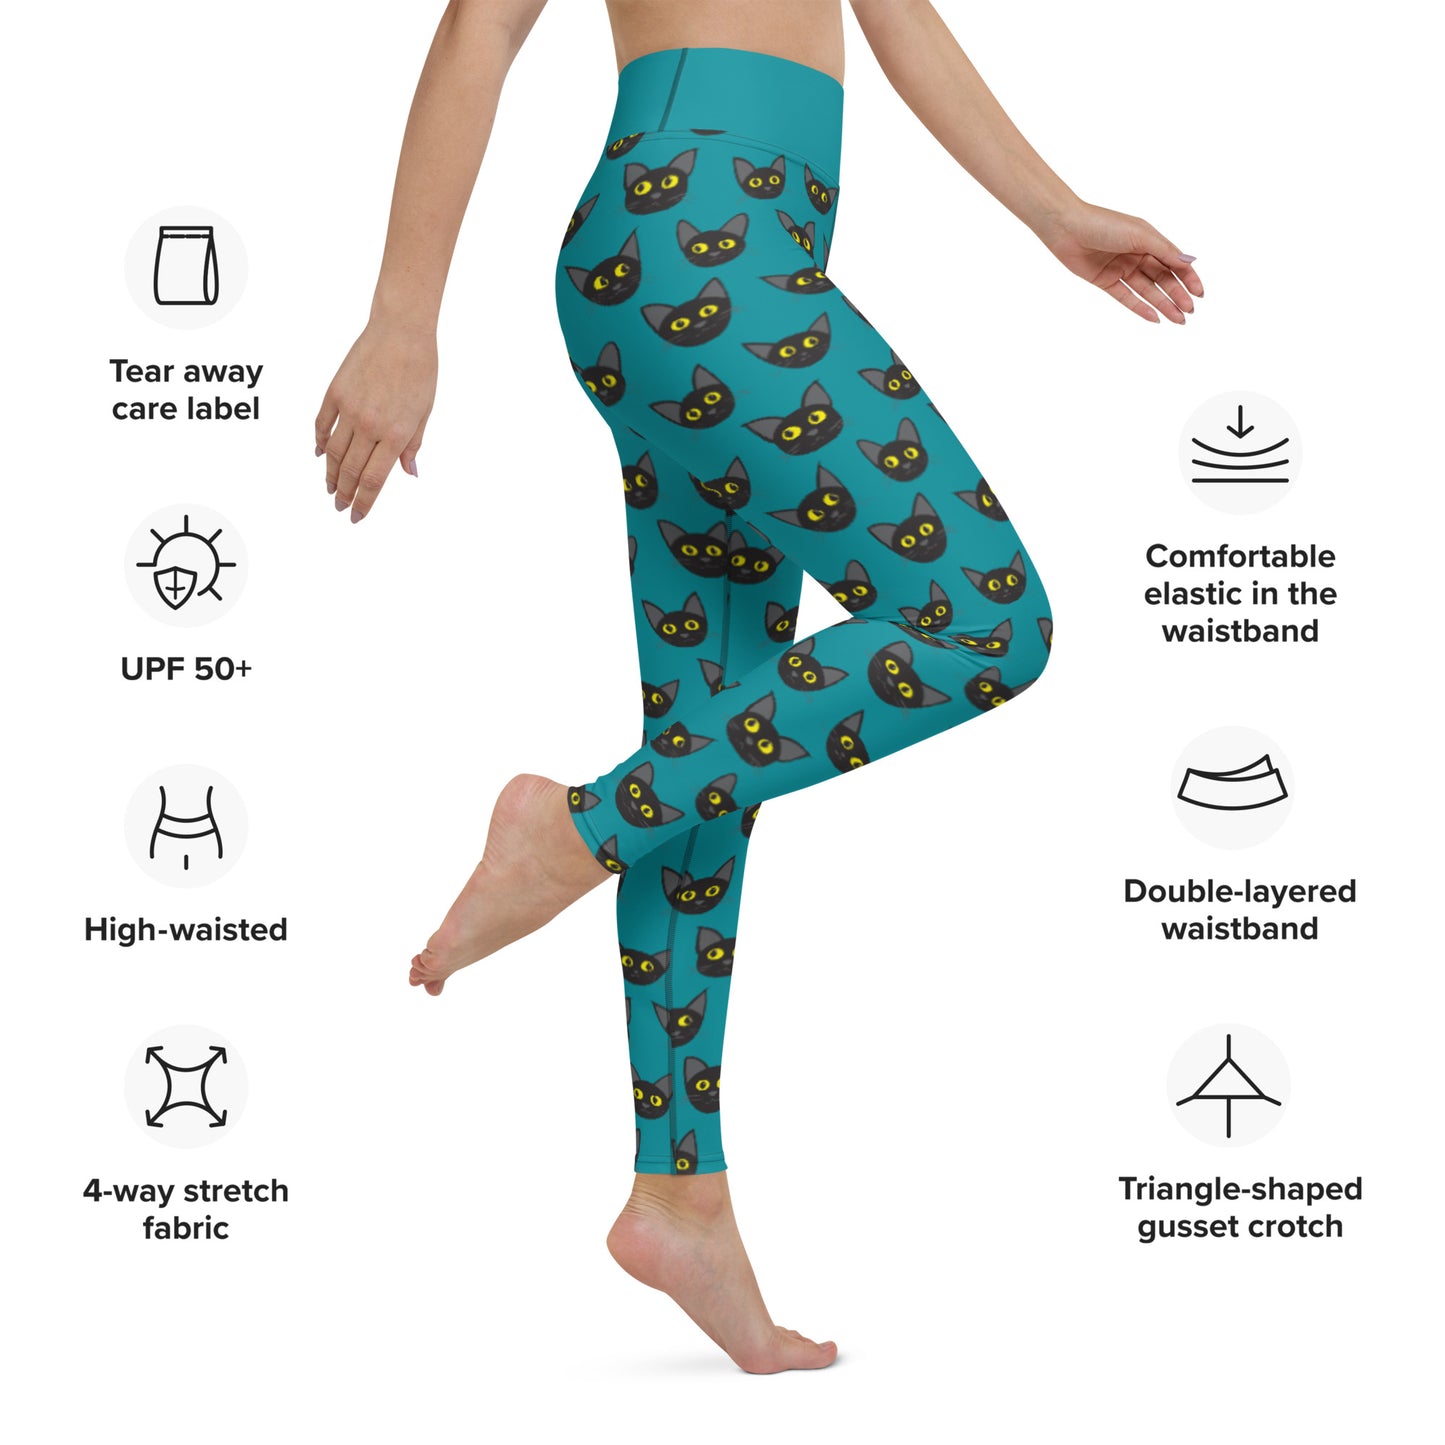 Yoga leggings adorned with multiple silly black cat faces